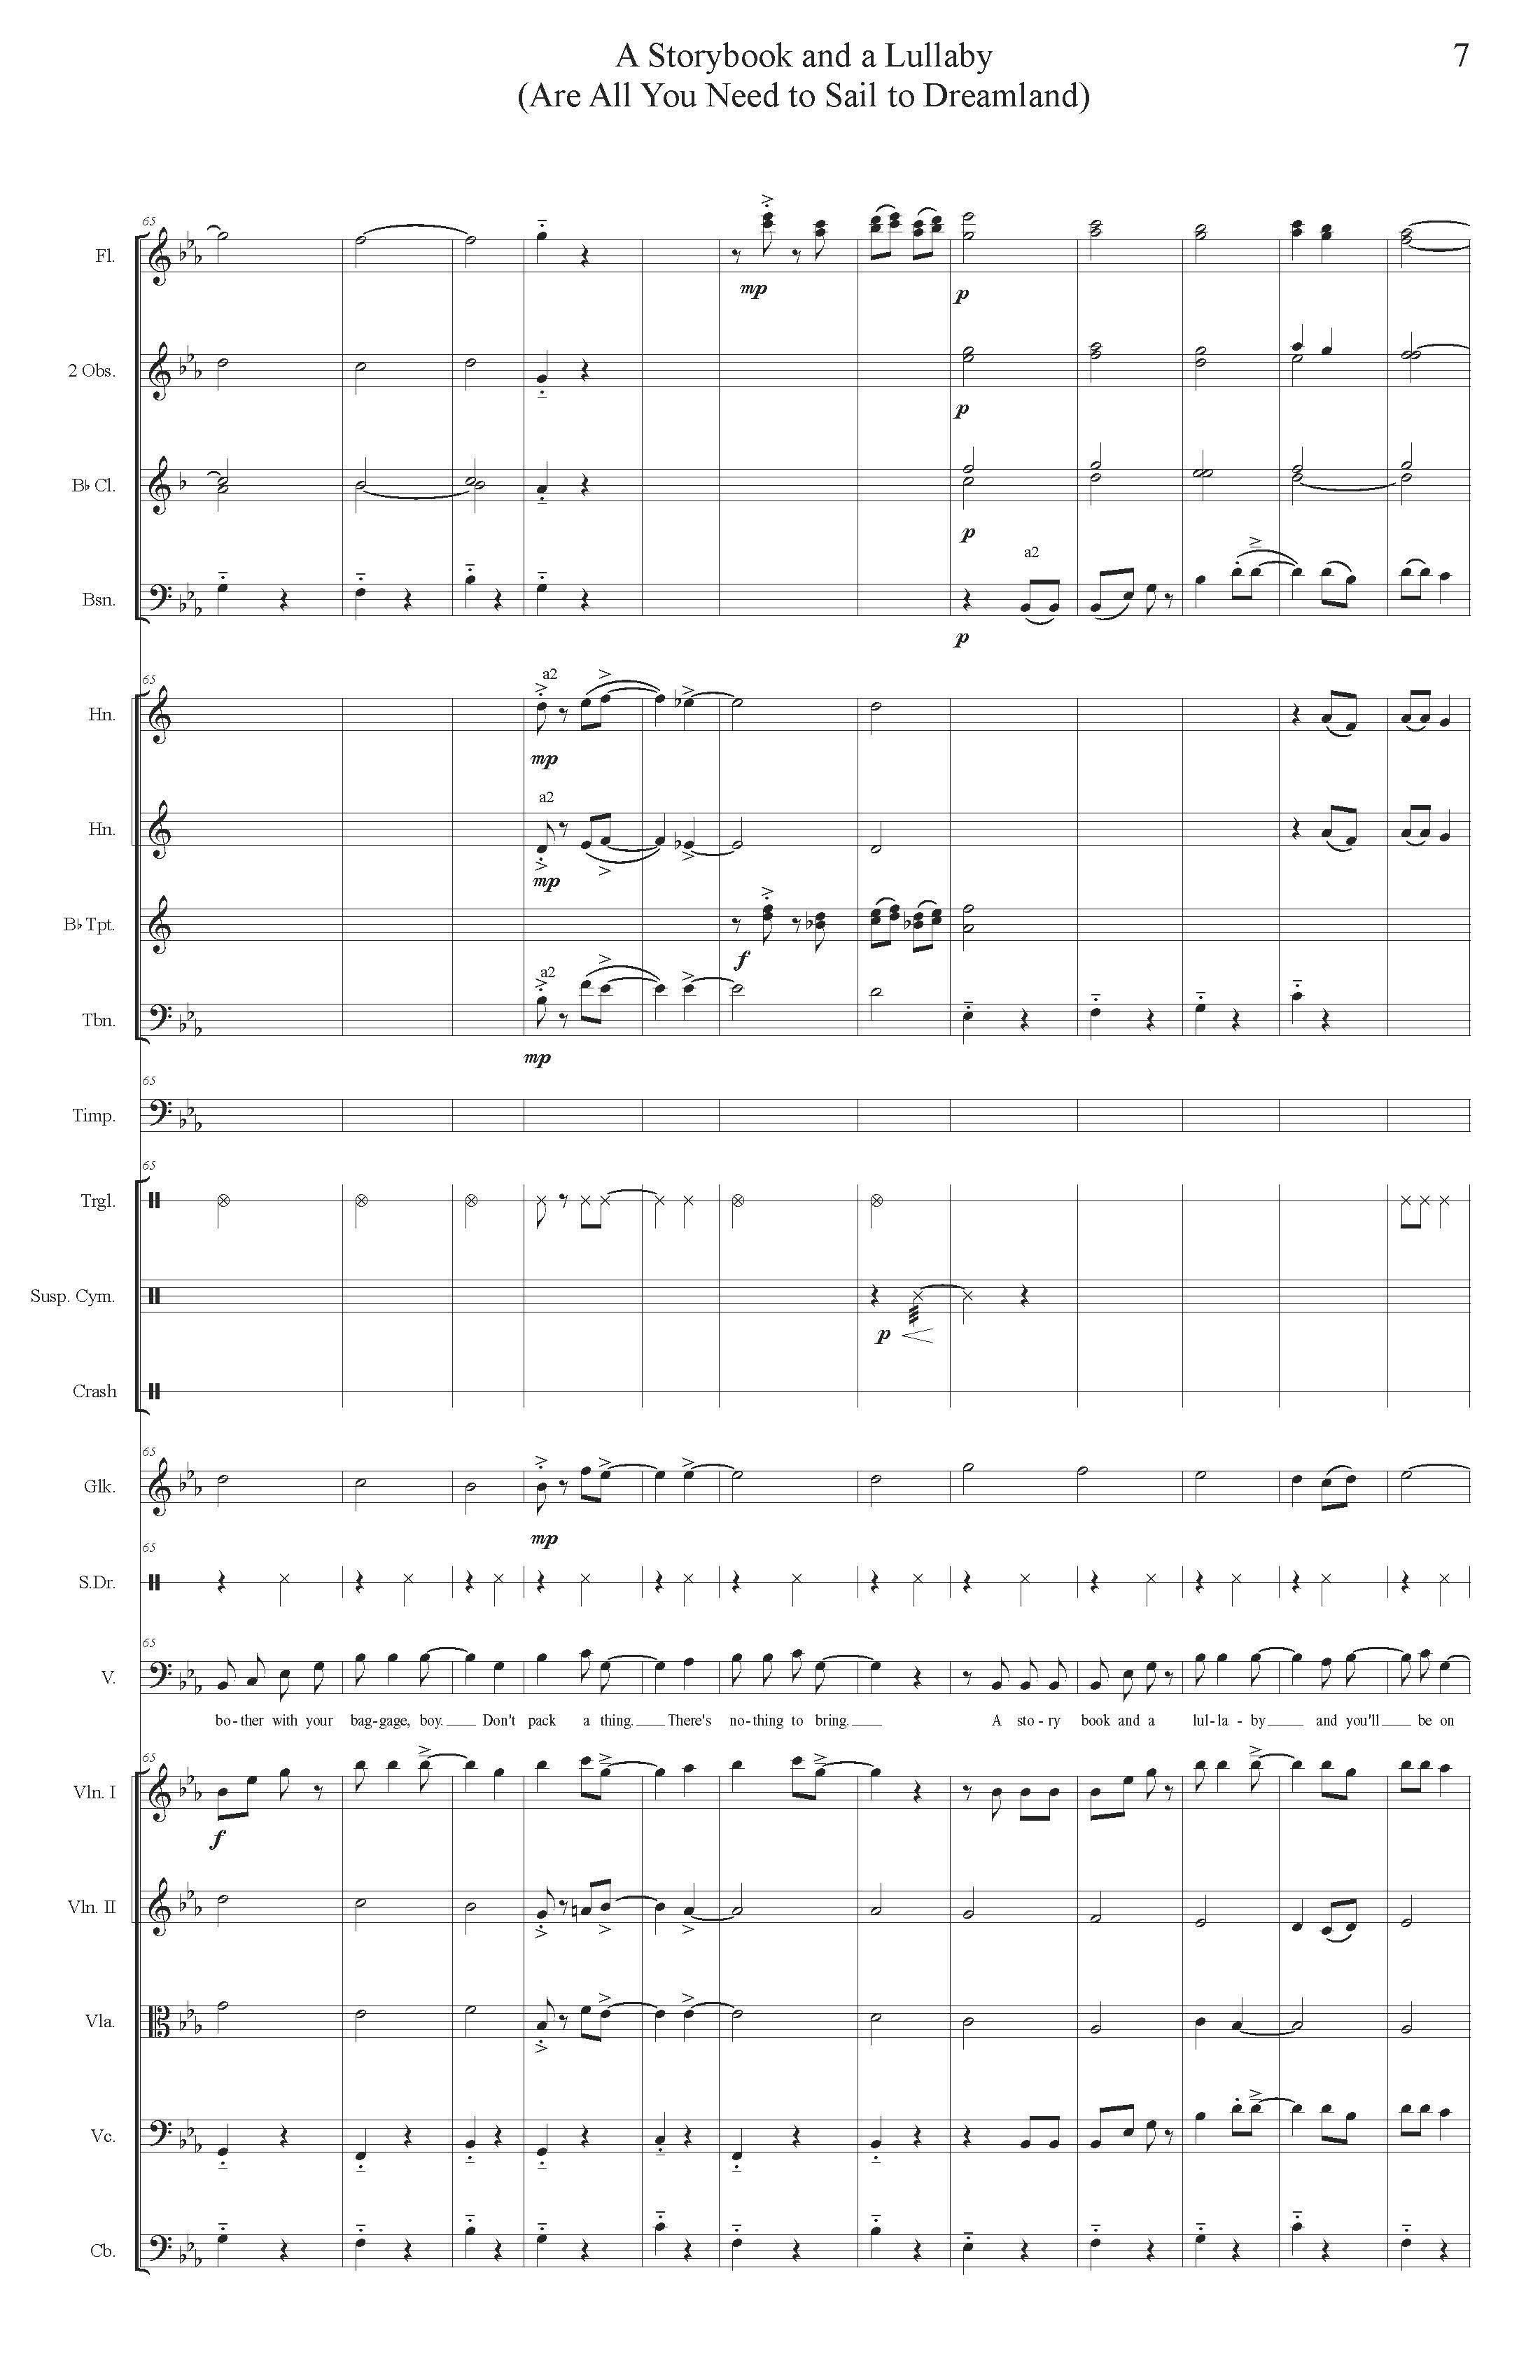 A STORYBOOK AND A LULLABY ORCH - Score_Page_07.jpg